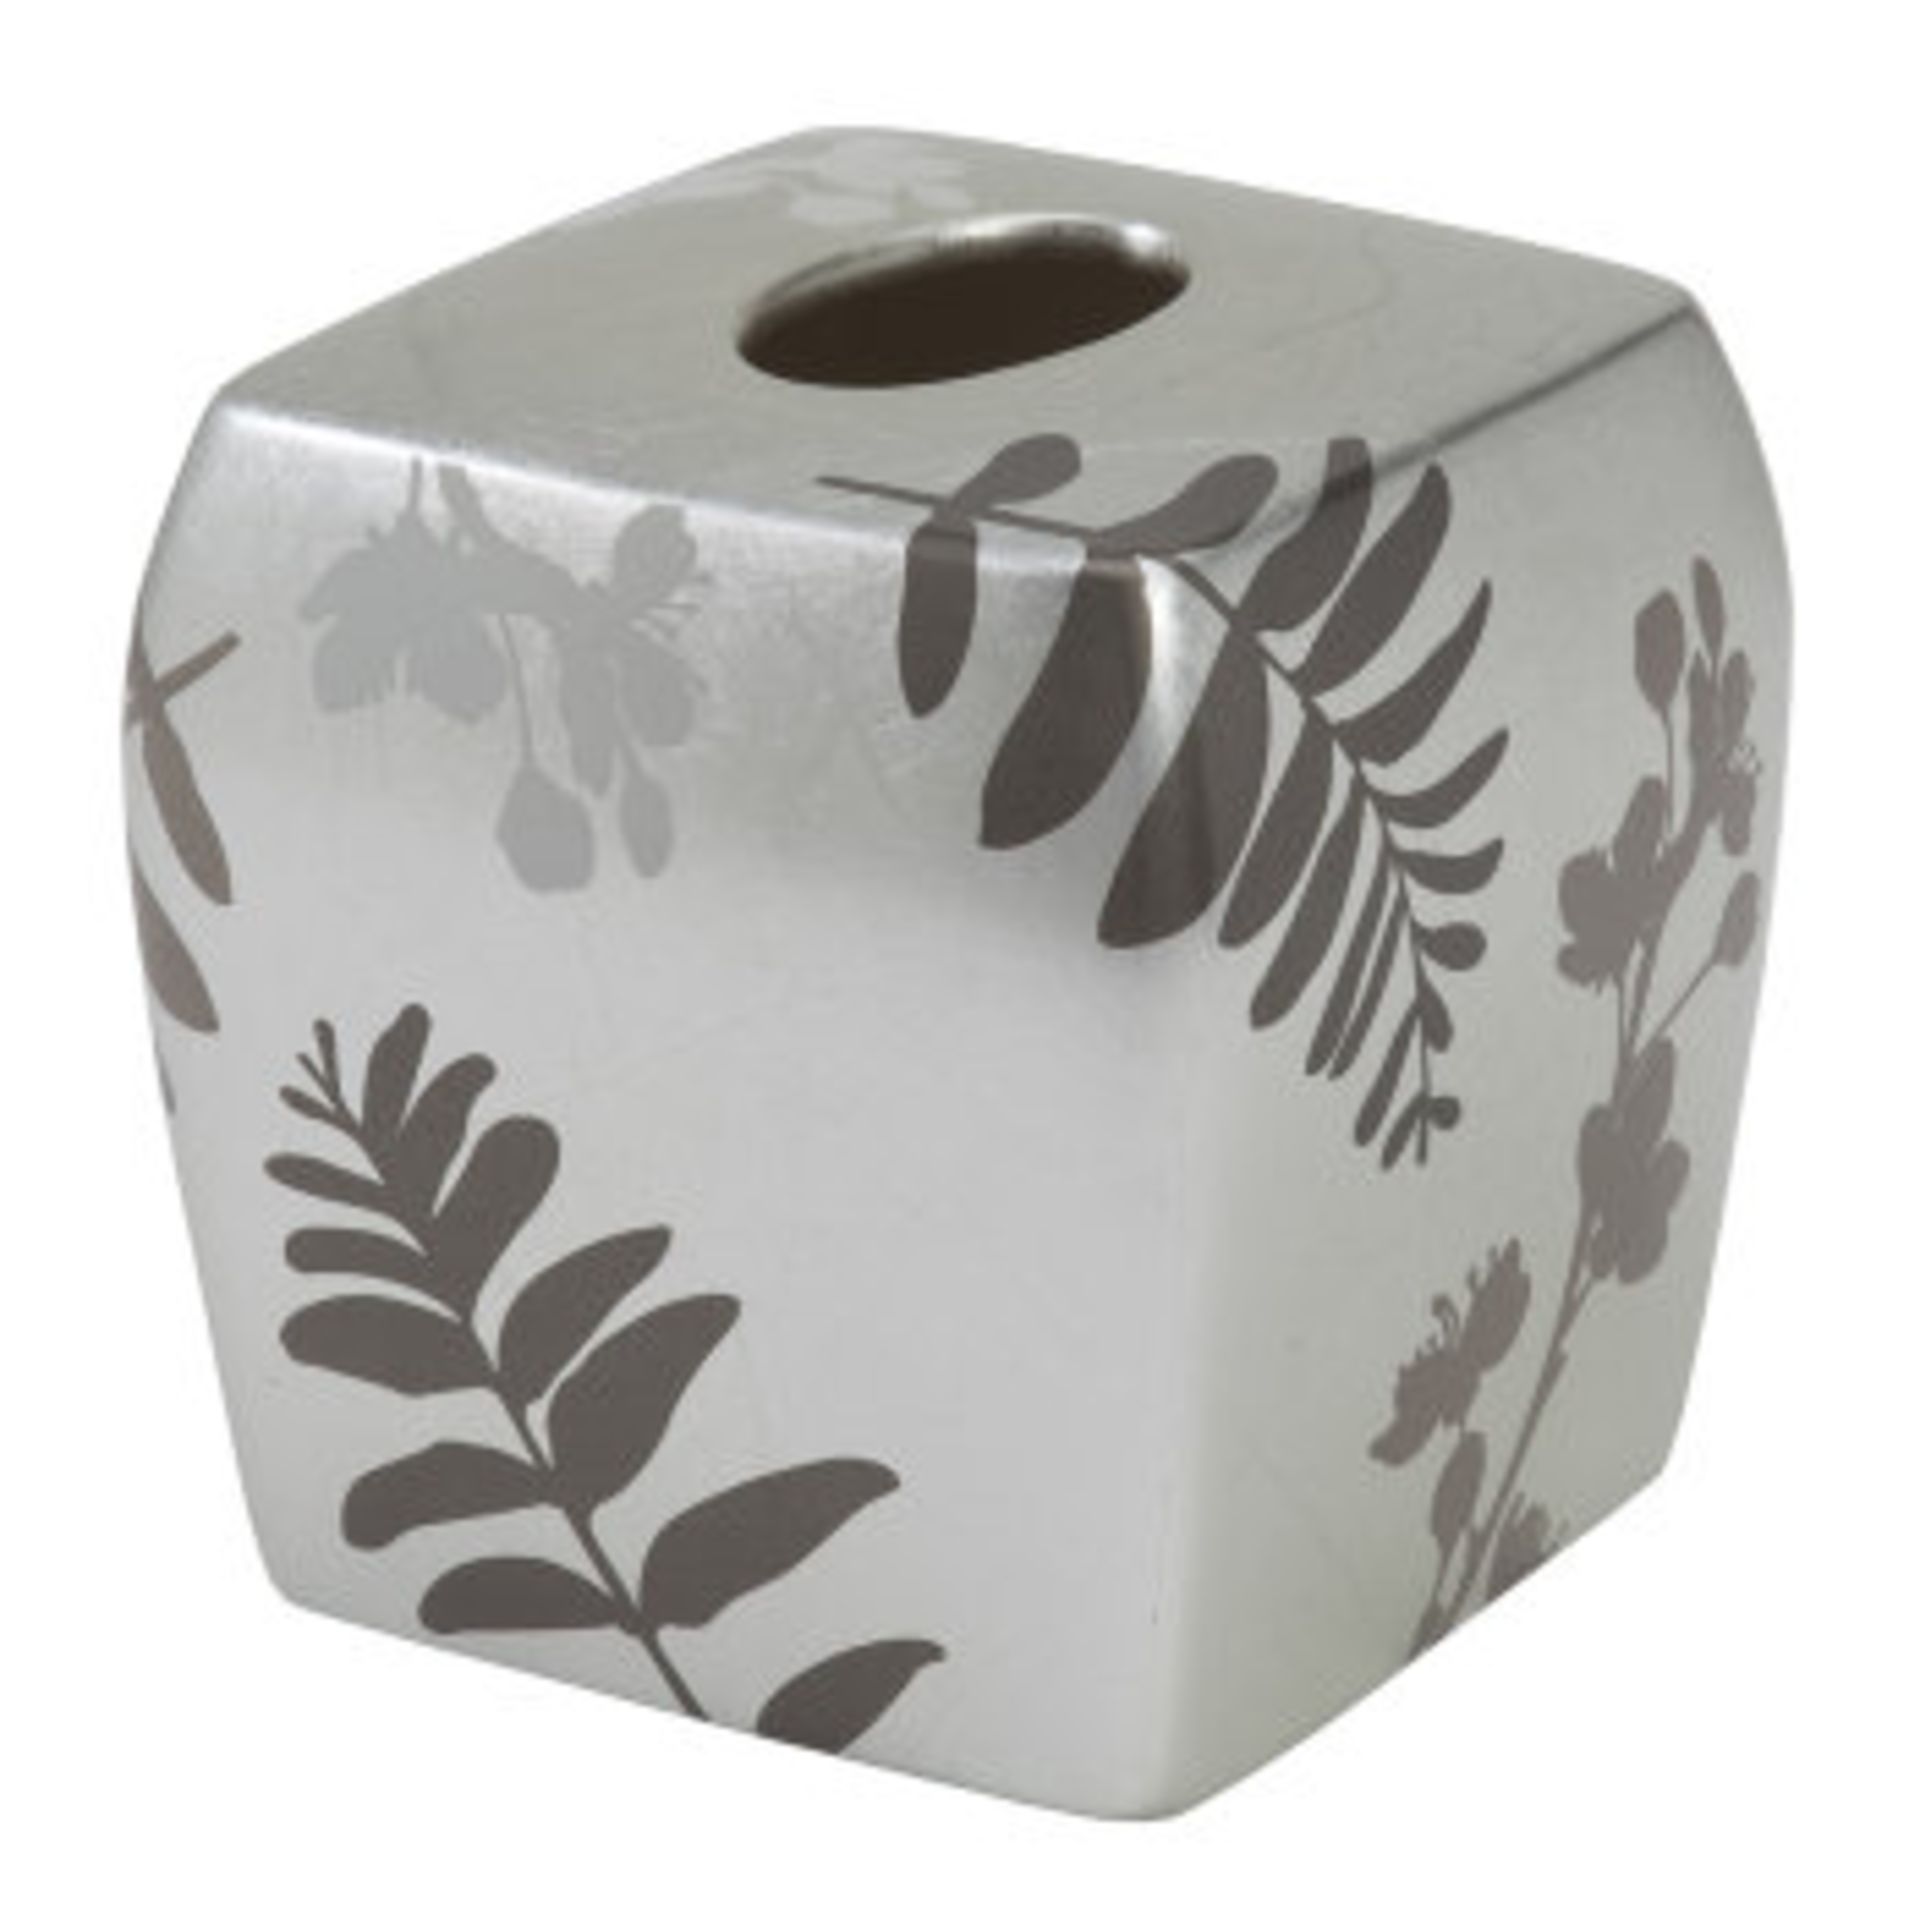 50 X TISSUE BOX COVERS , DECO HOUSE ITEM